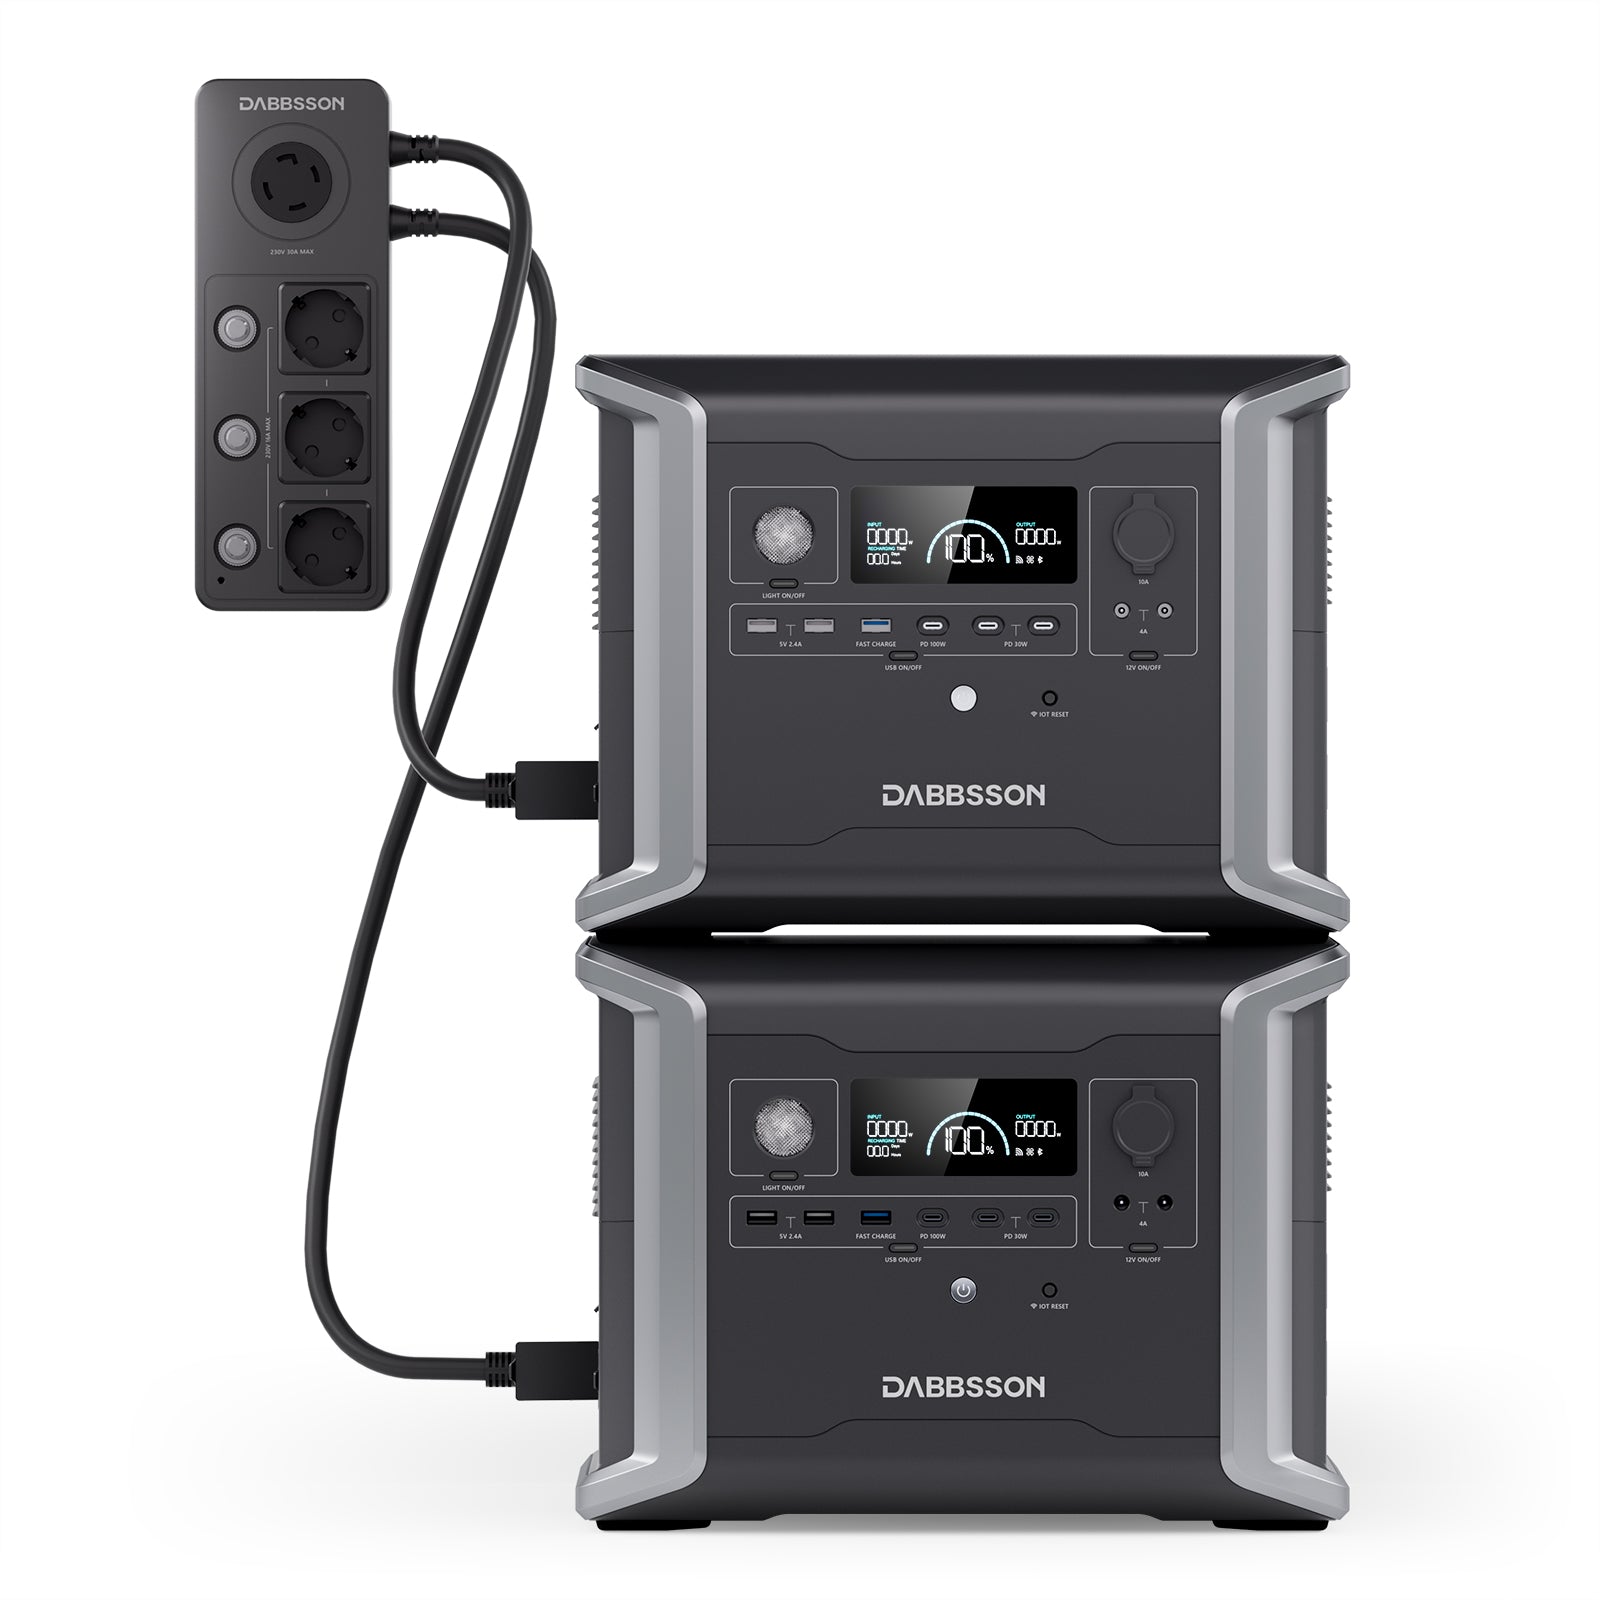 Dabbsson DBS1300 Portable Power Station - 1330Wh | 1200W